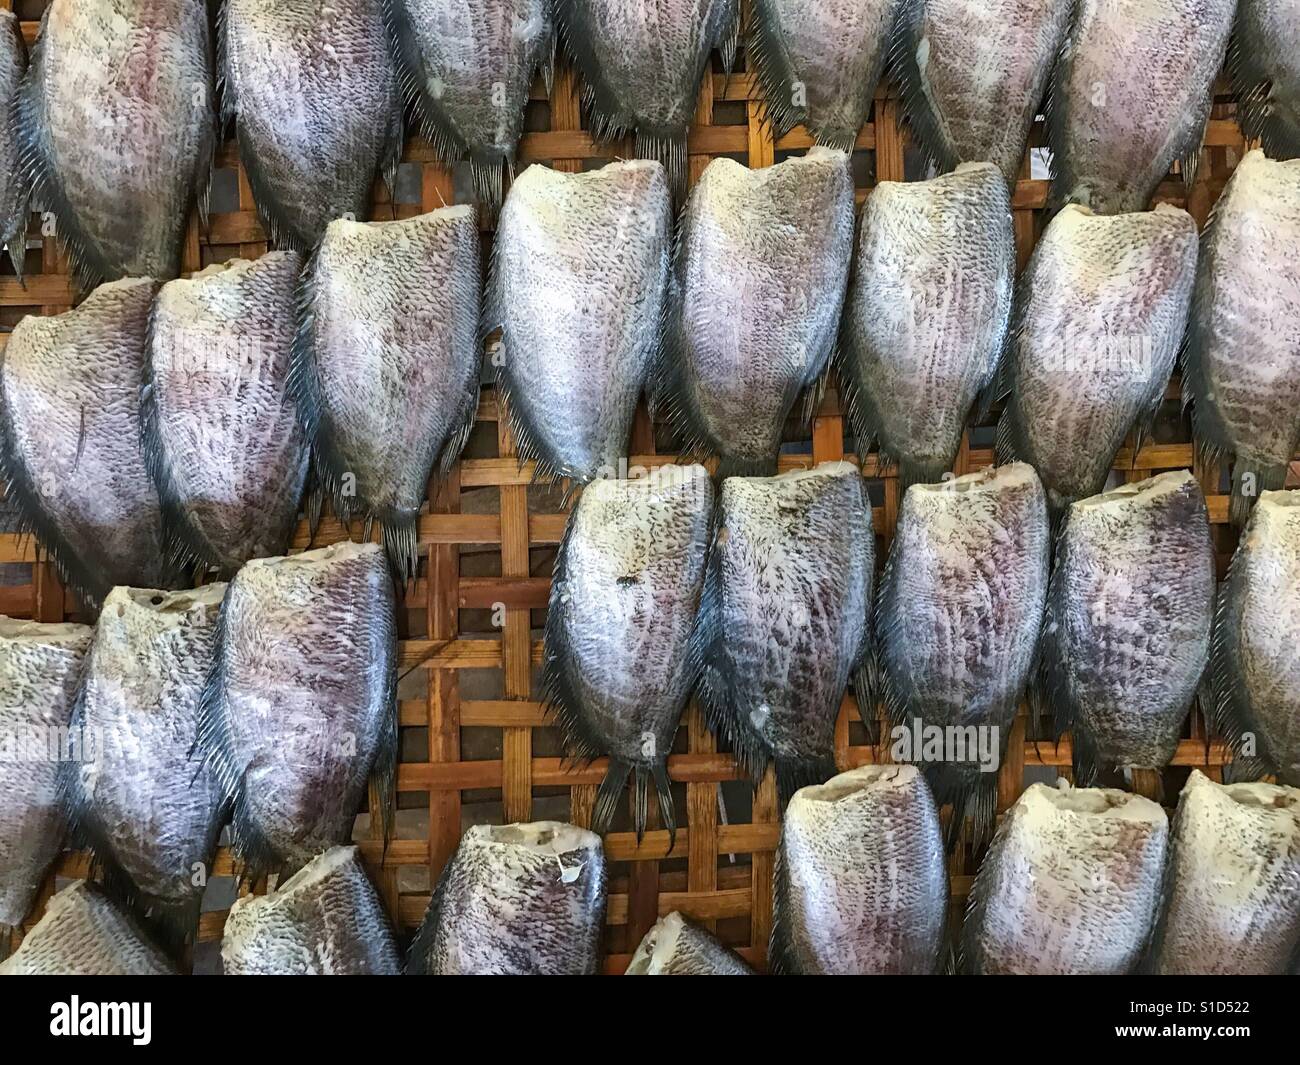 Dried salted damsel fish sold in Thai market Stock Photo